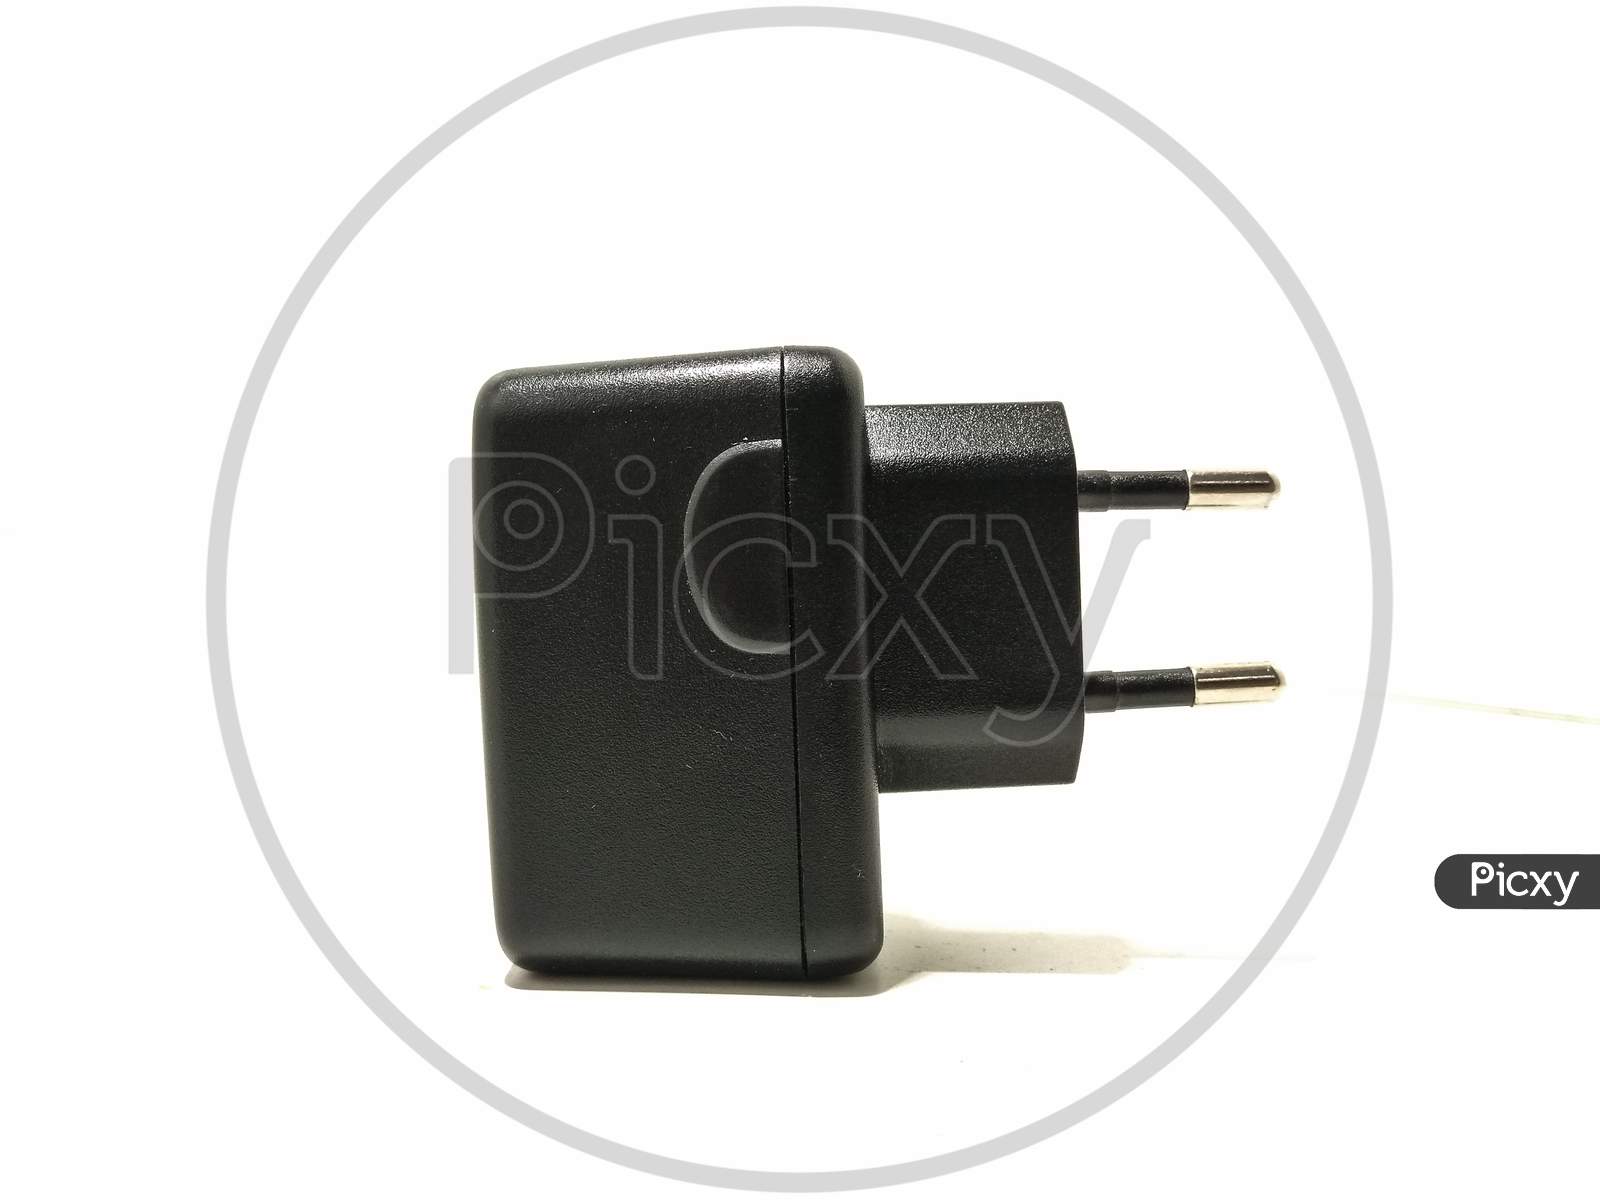 A picture of charging adapter